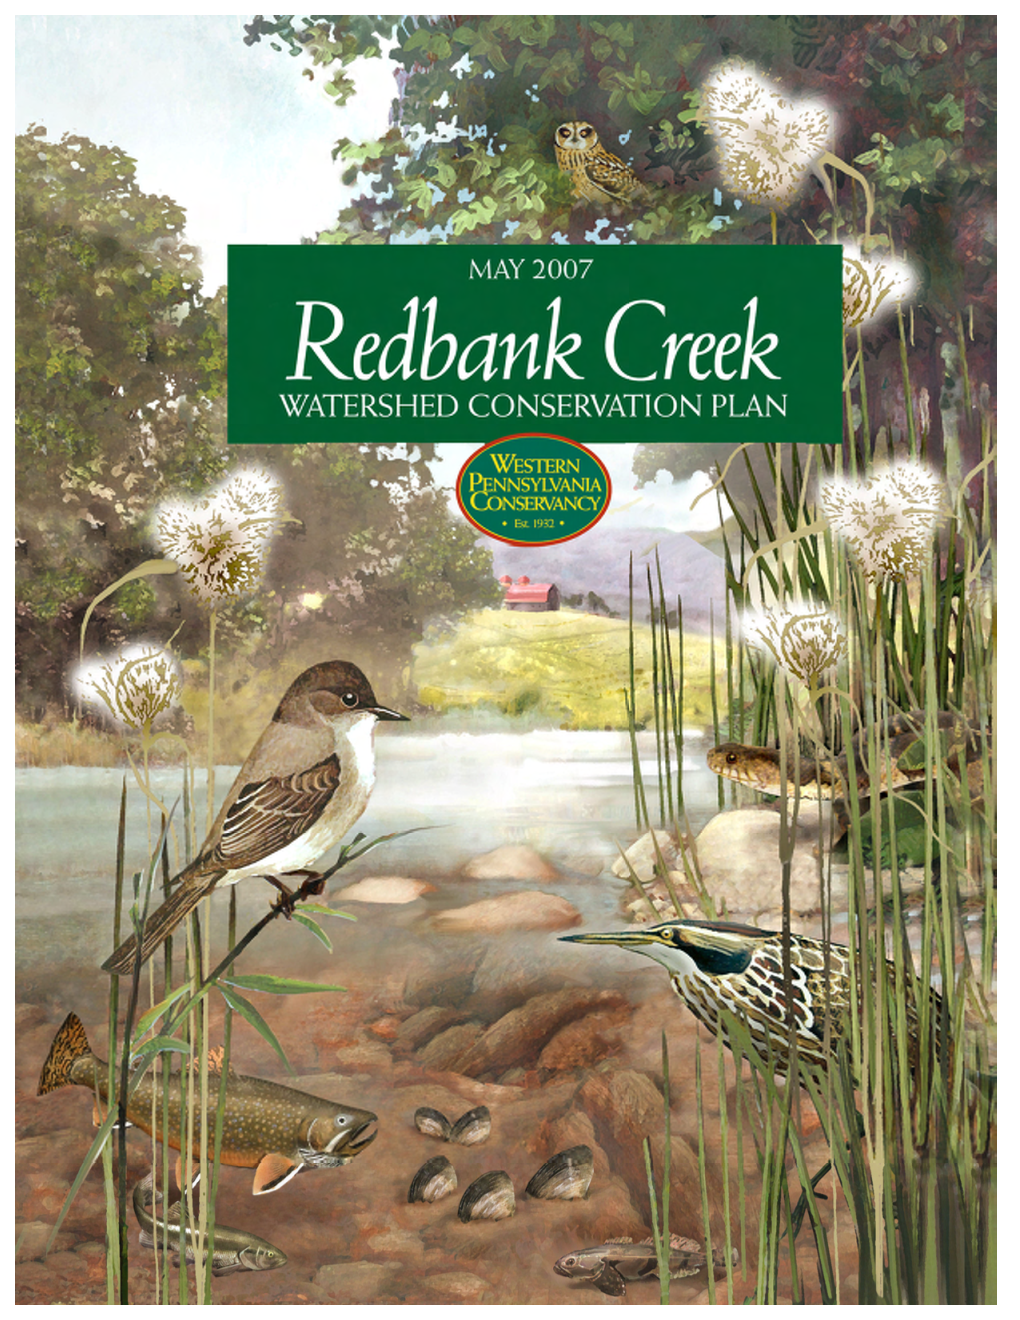 View the Redbank Creek Watershed Conservation Plan